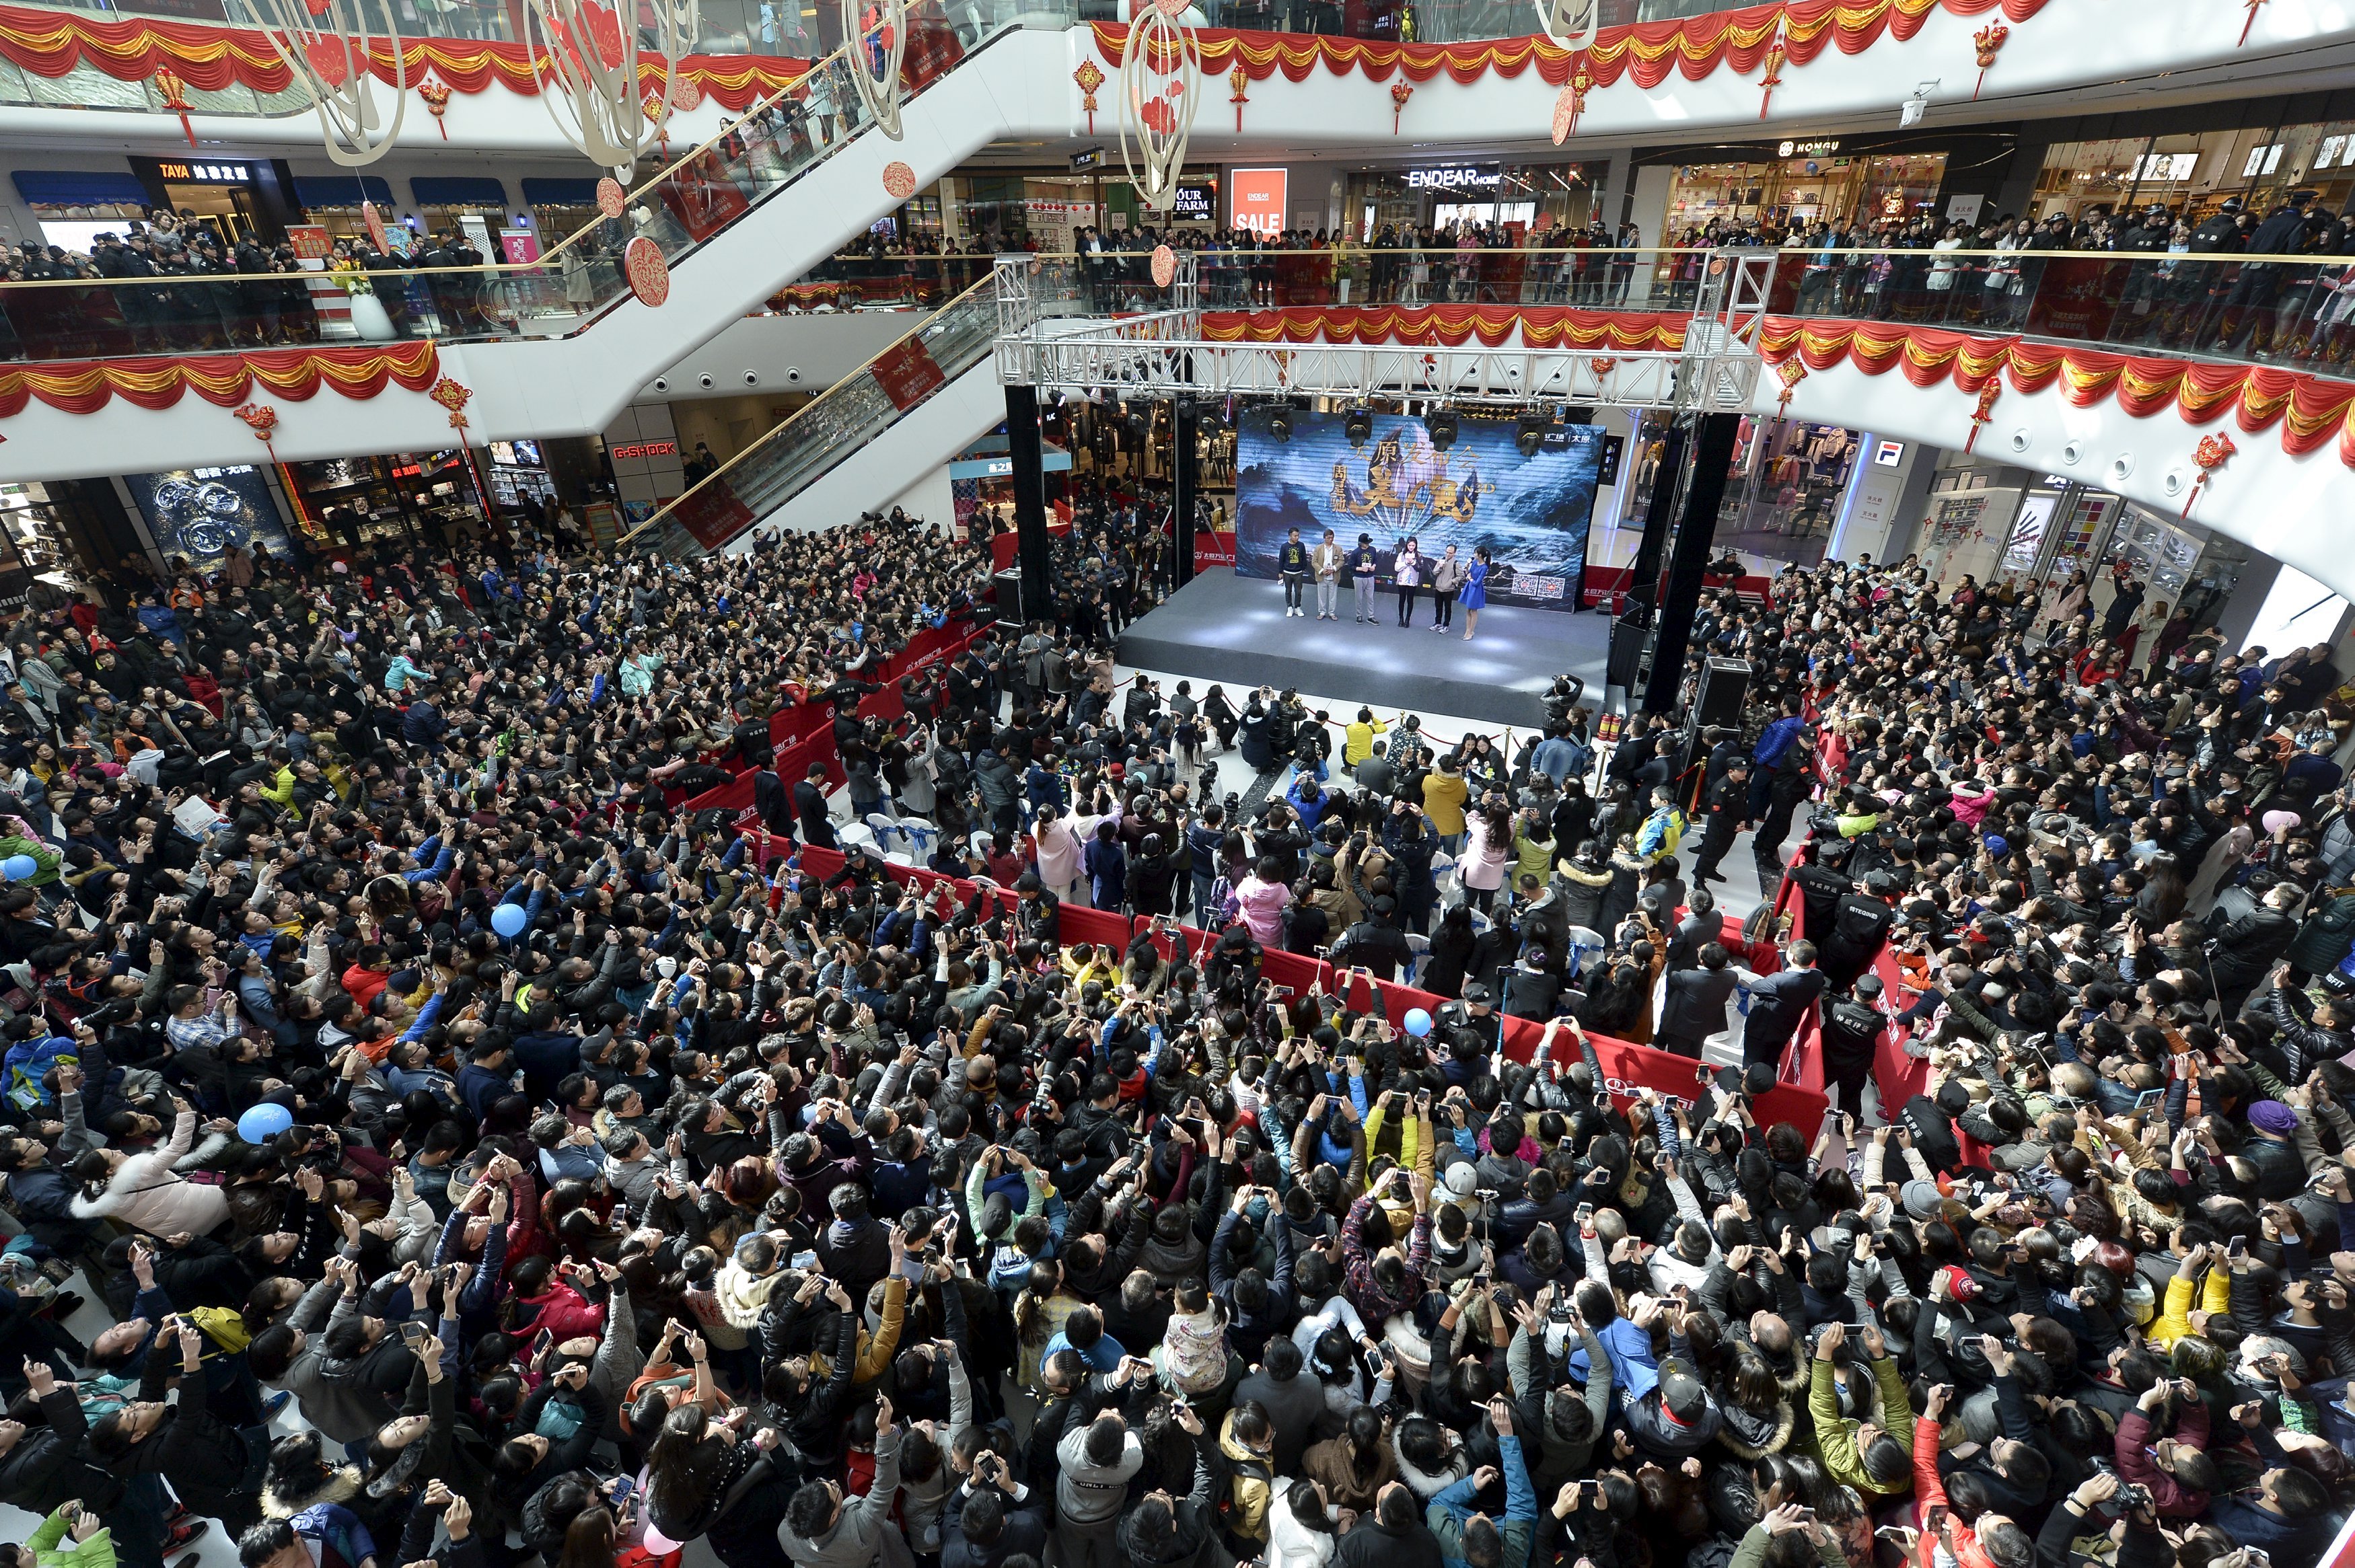 People attend a promotional event with Hong Kong star Stephen Chow for the film, The Mermaid, in Taiyuan, China, on Feb. 17, 2016. (China Daily/Reuters)